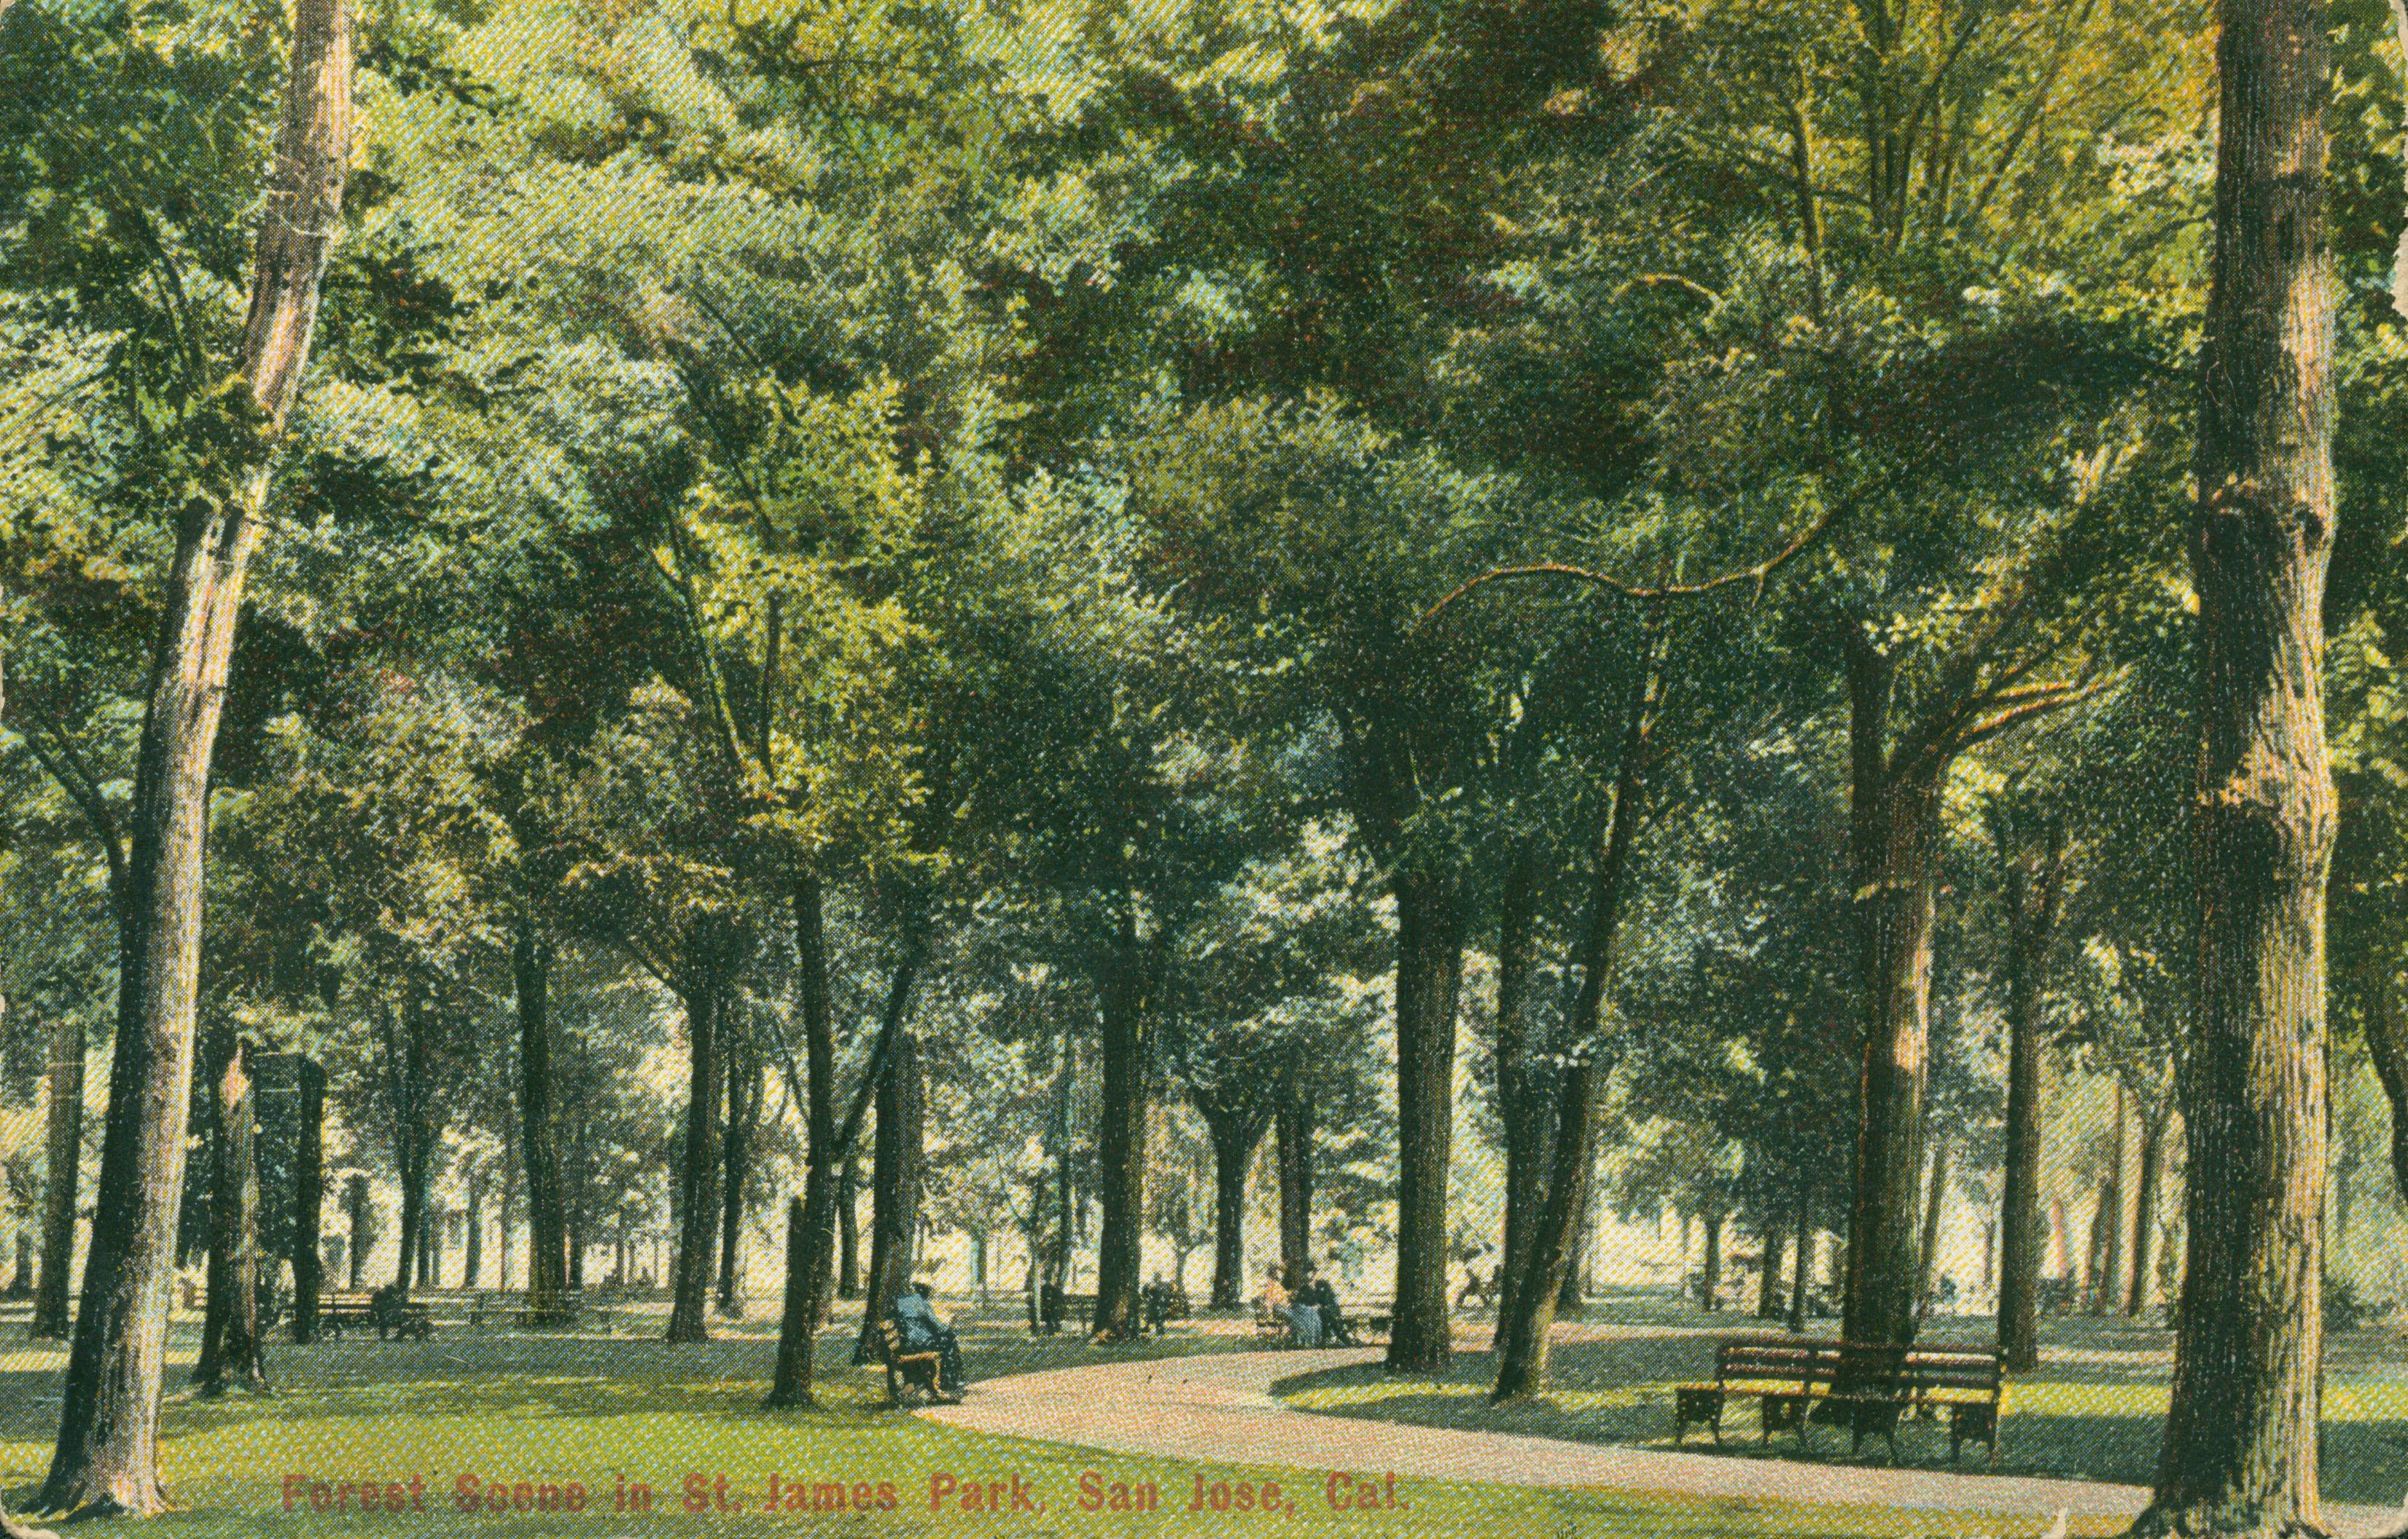 Color scene of park with path, benches and thick trees